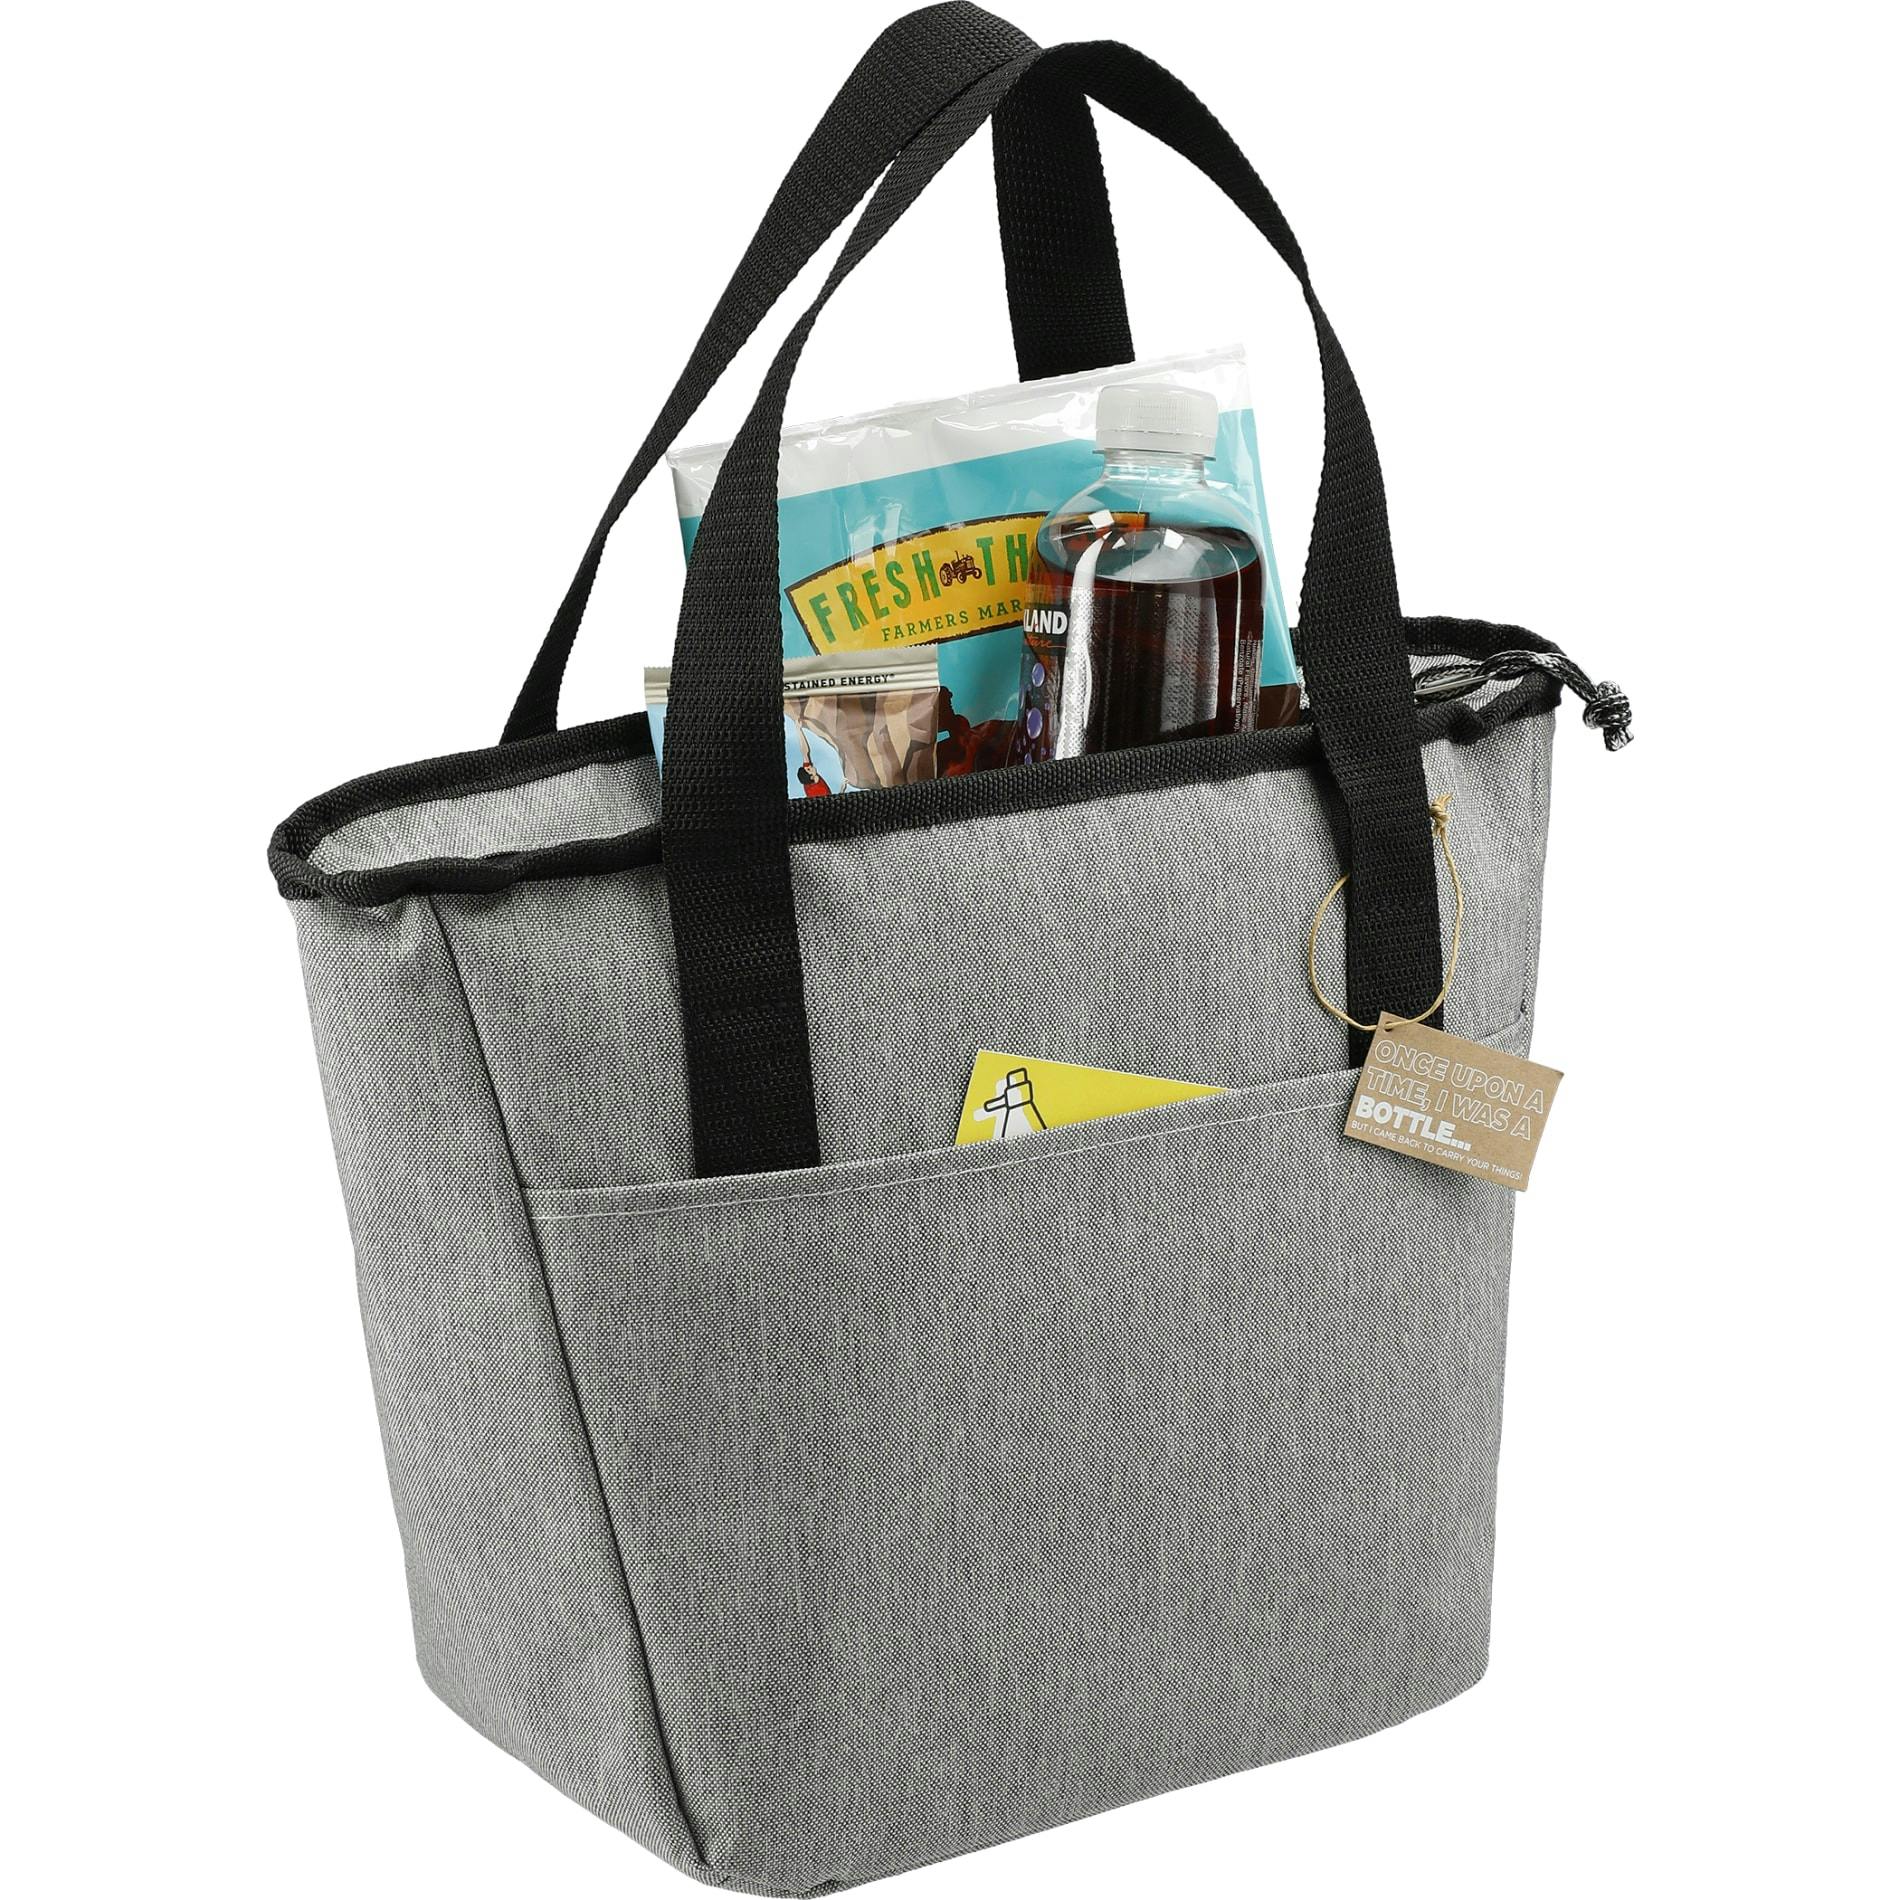 Merchant & Craft Revive Recycled 9 Can Tote Cooler - additional Image 6